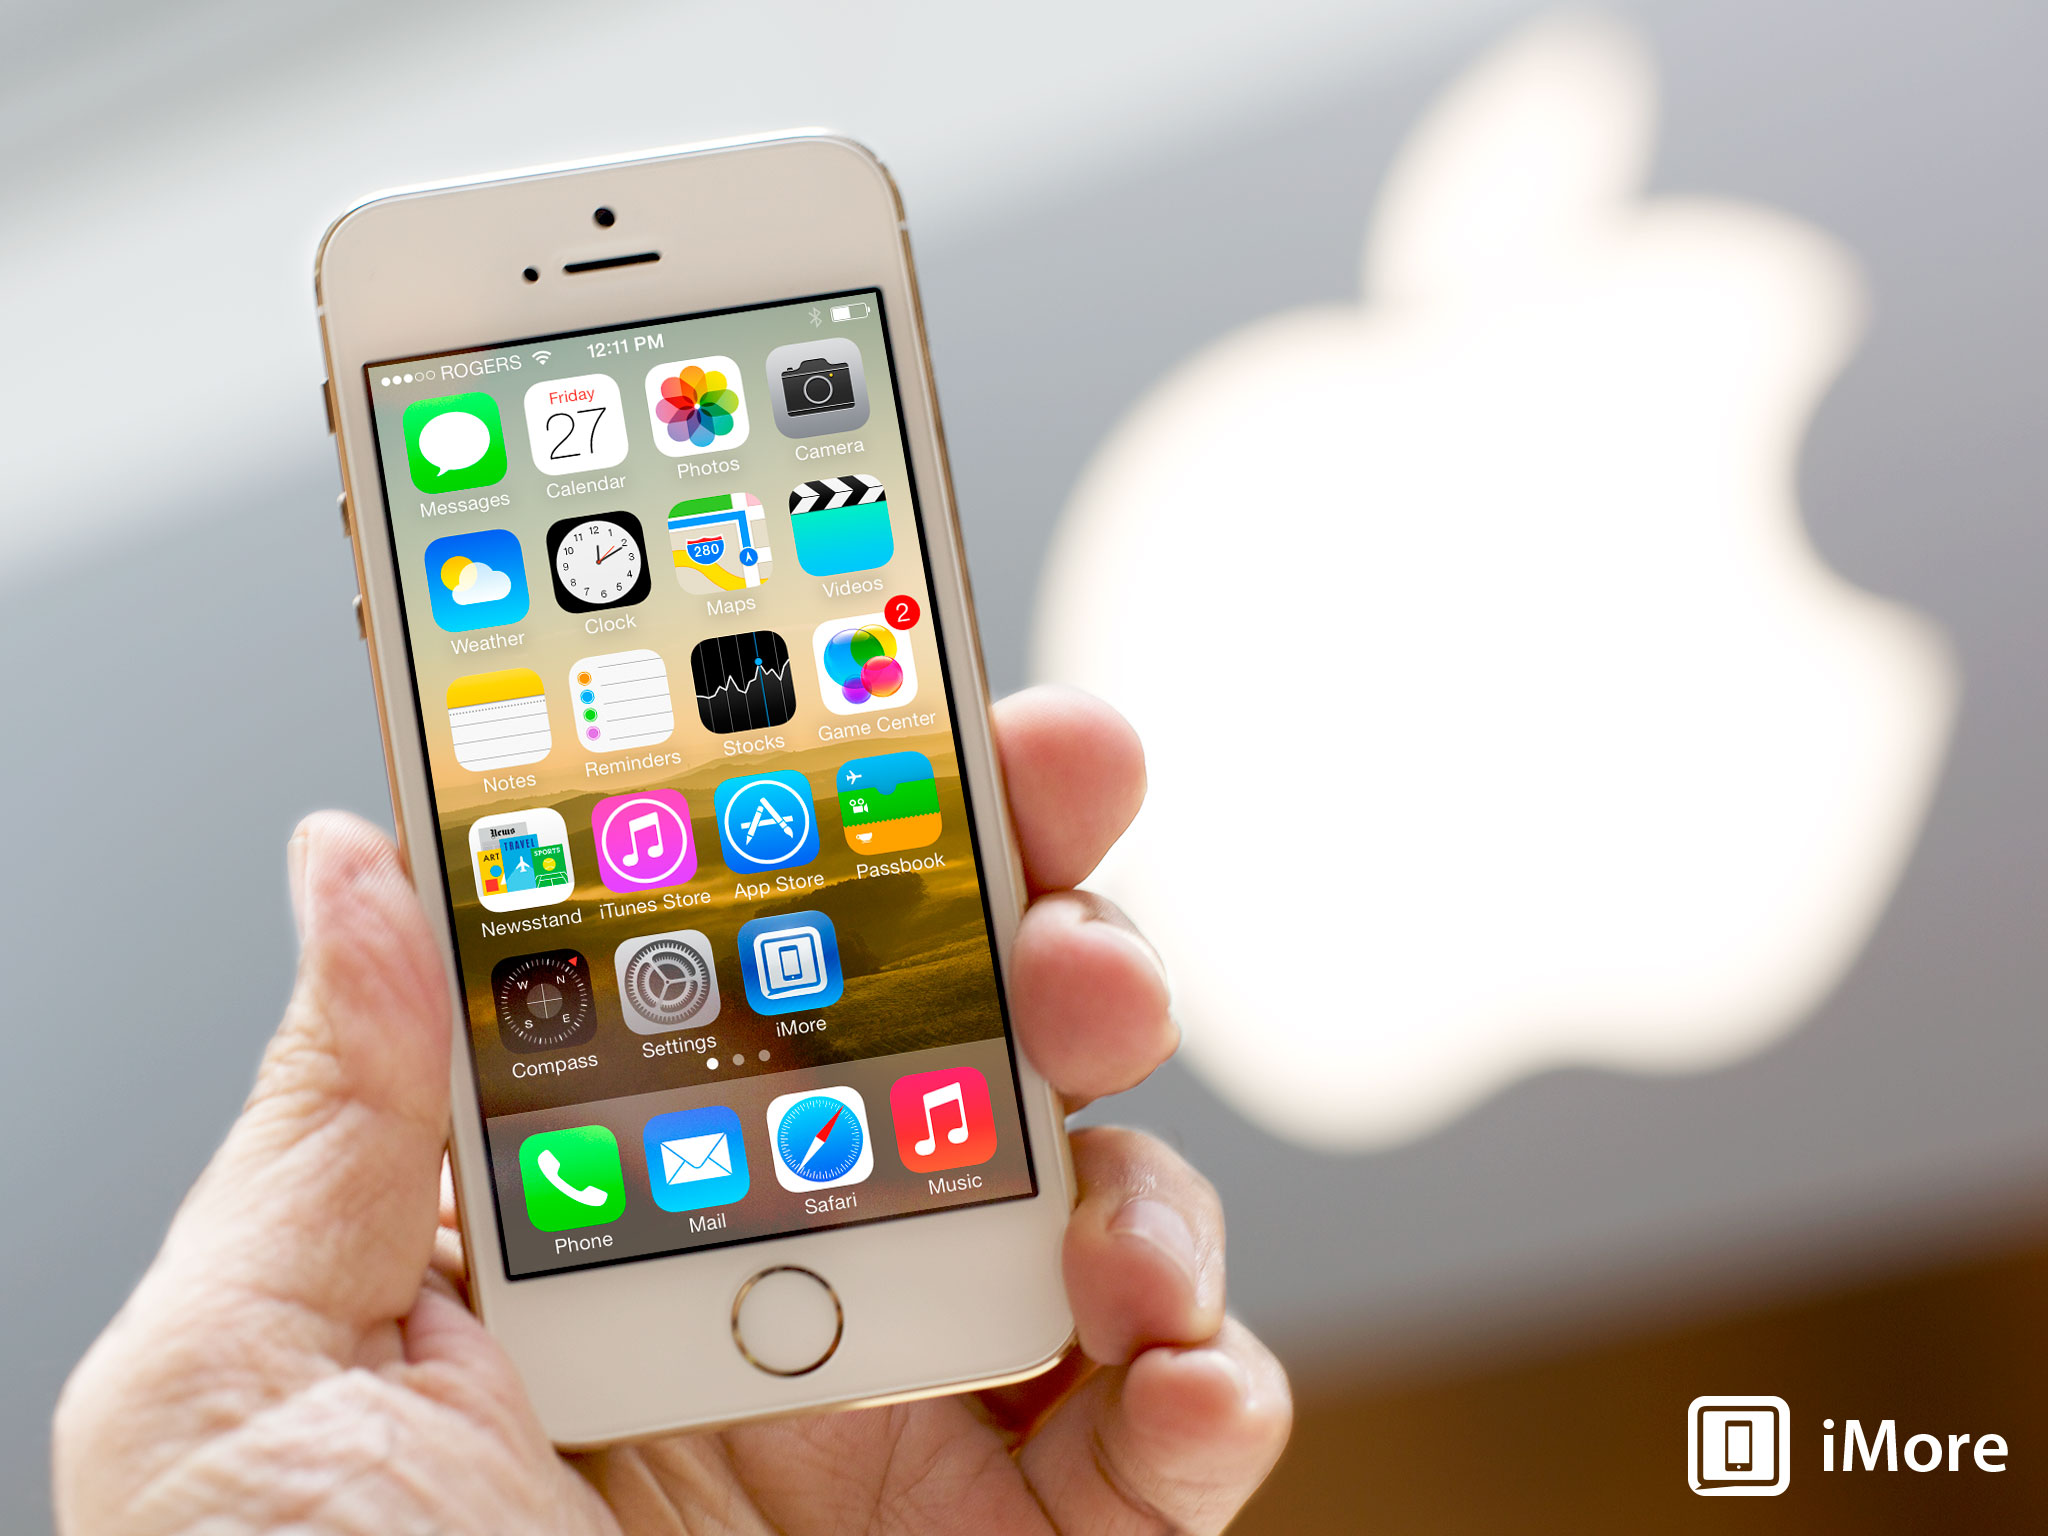 History of iPhone 5s: The most forward thinking iPhone ever